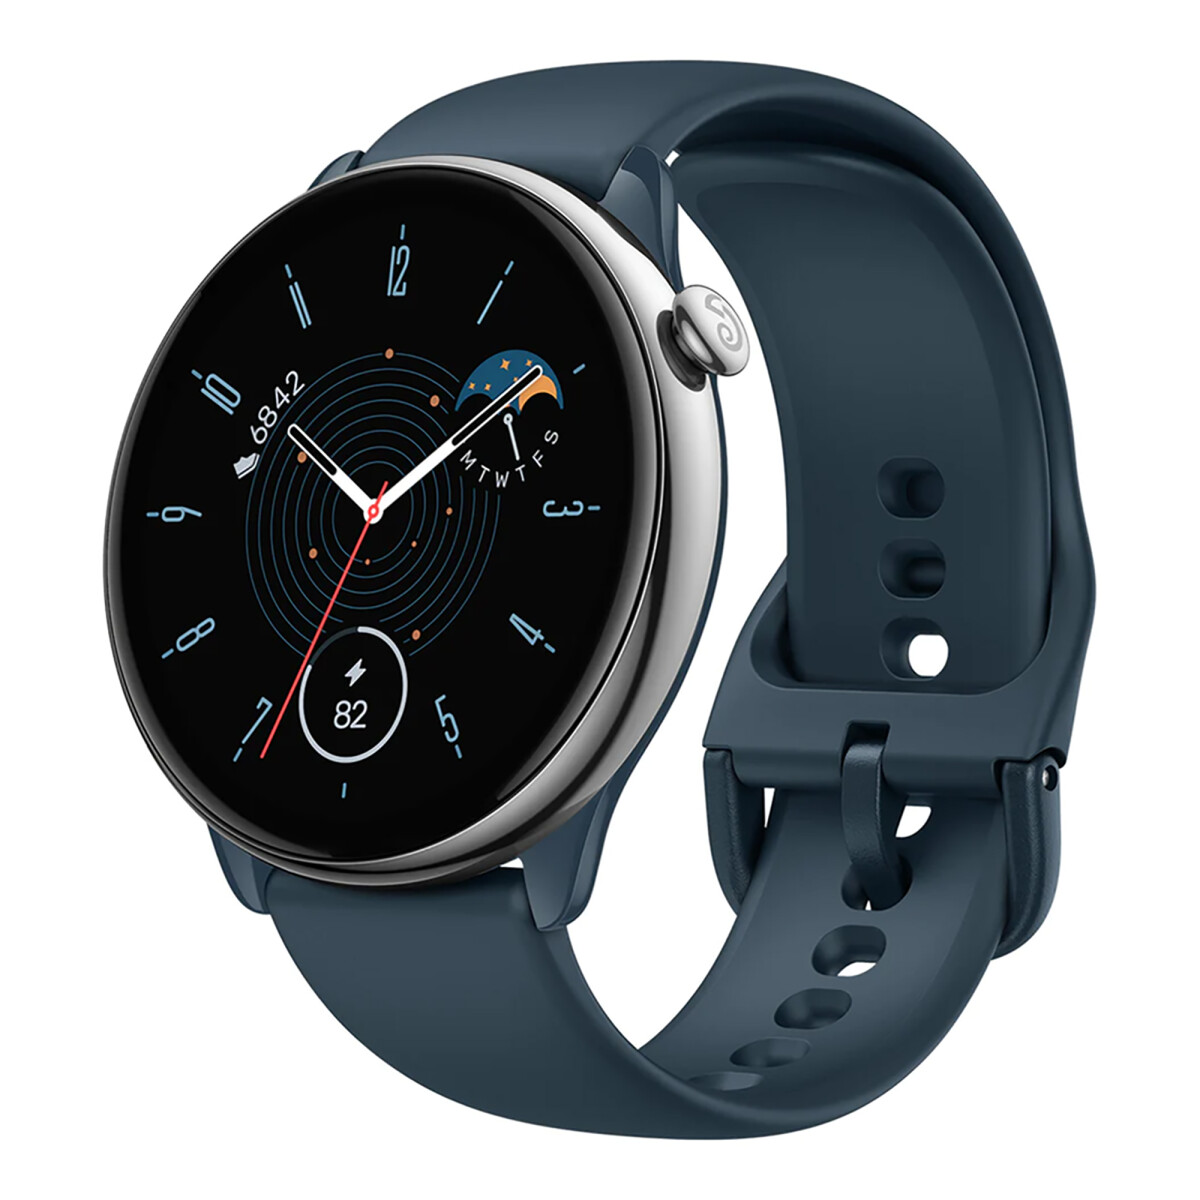 Amazfit - Smartwatch Gtr Mini 42,83 Mm A2174 - 5ATM. 1,28'' Amoled. Bluetooth. Gps. Android / Ios. 2 - 001 